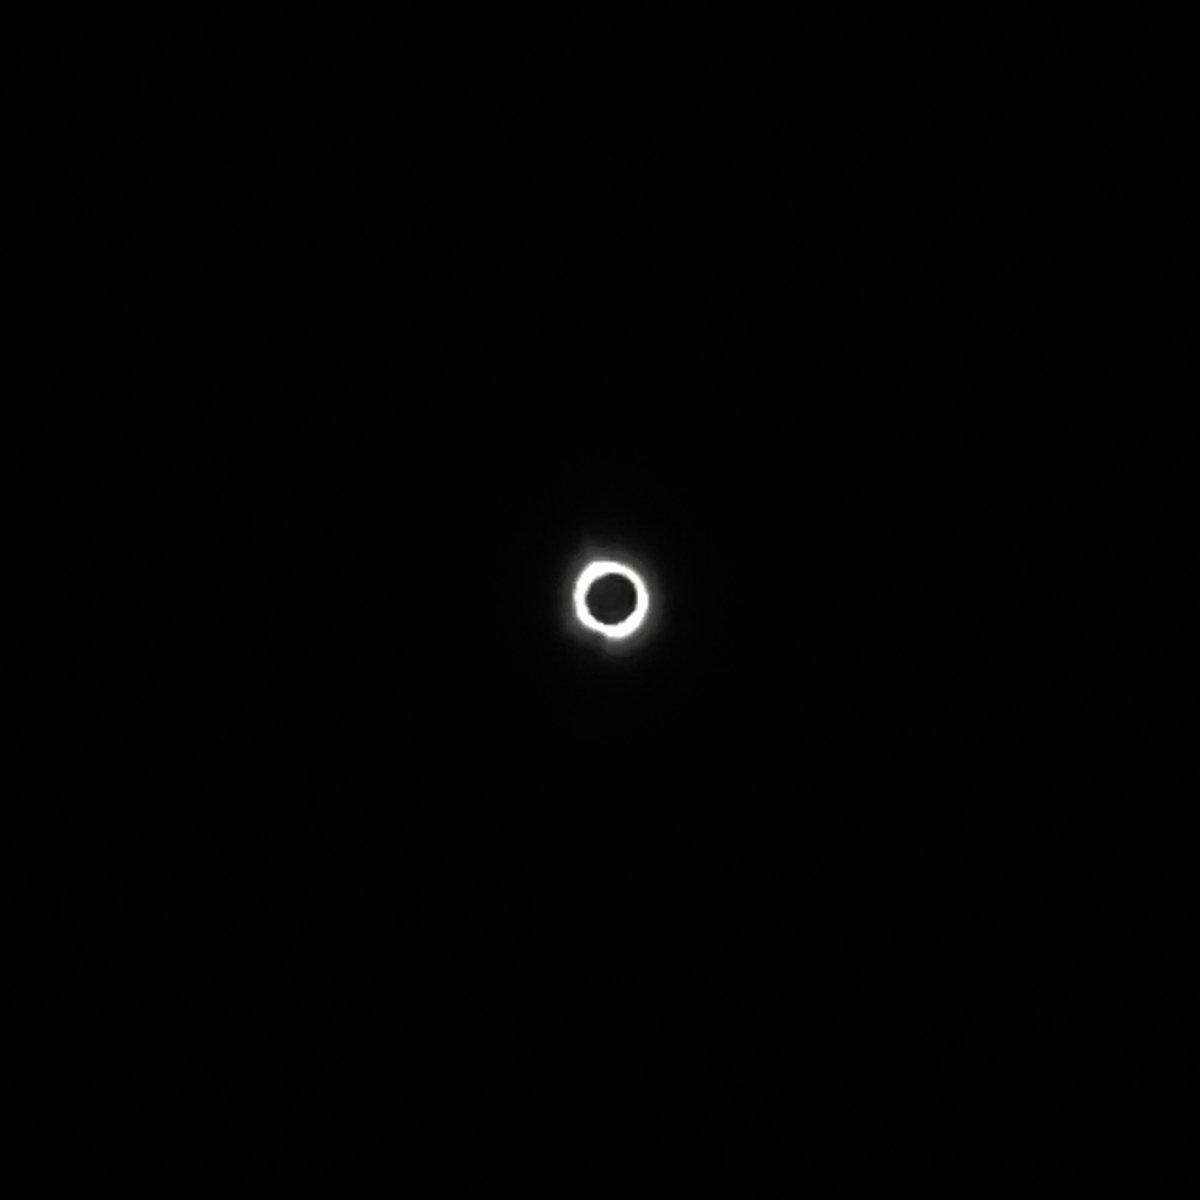 And just like that, totality is over! Managed to snap this photo when I wasn’t overcome with emotion.